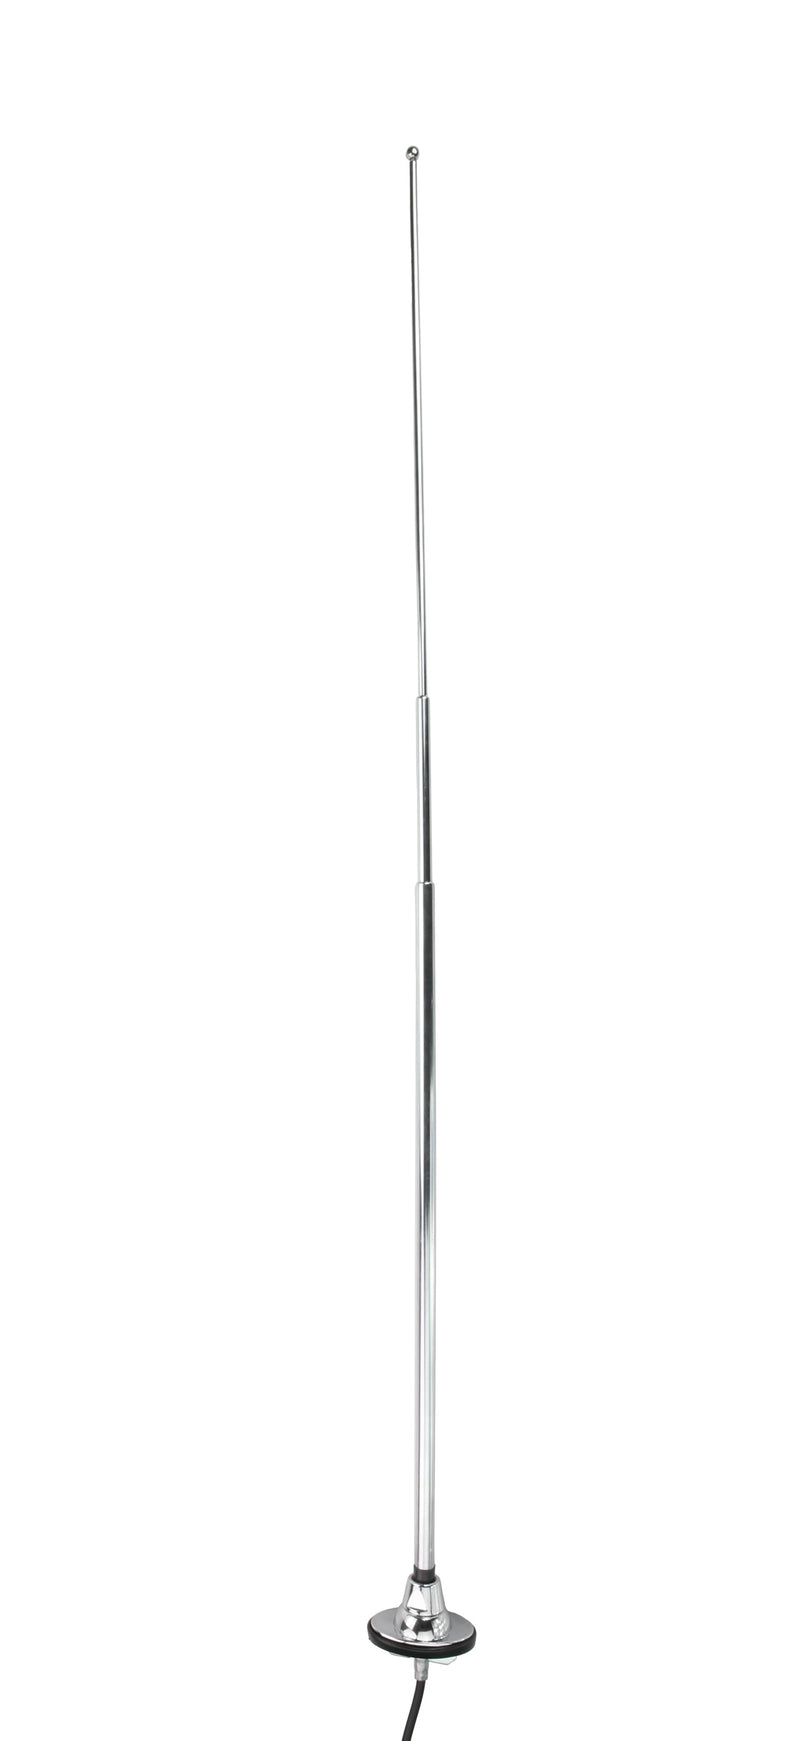 1980-86 Ford LTD Replacement Antenna